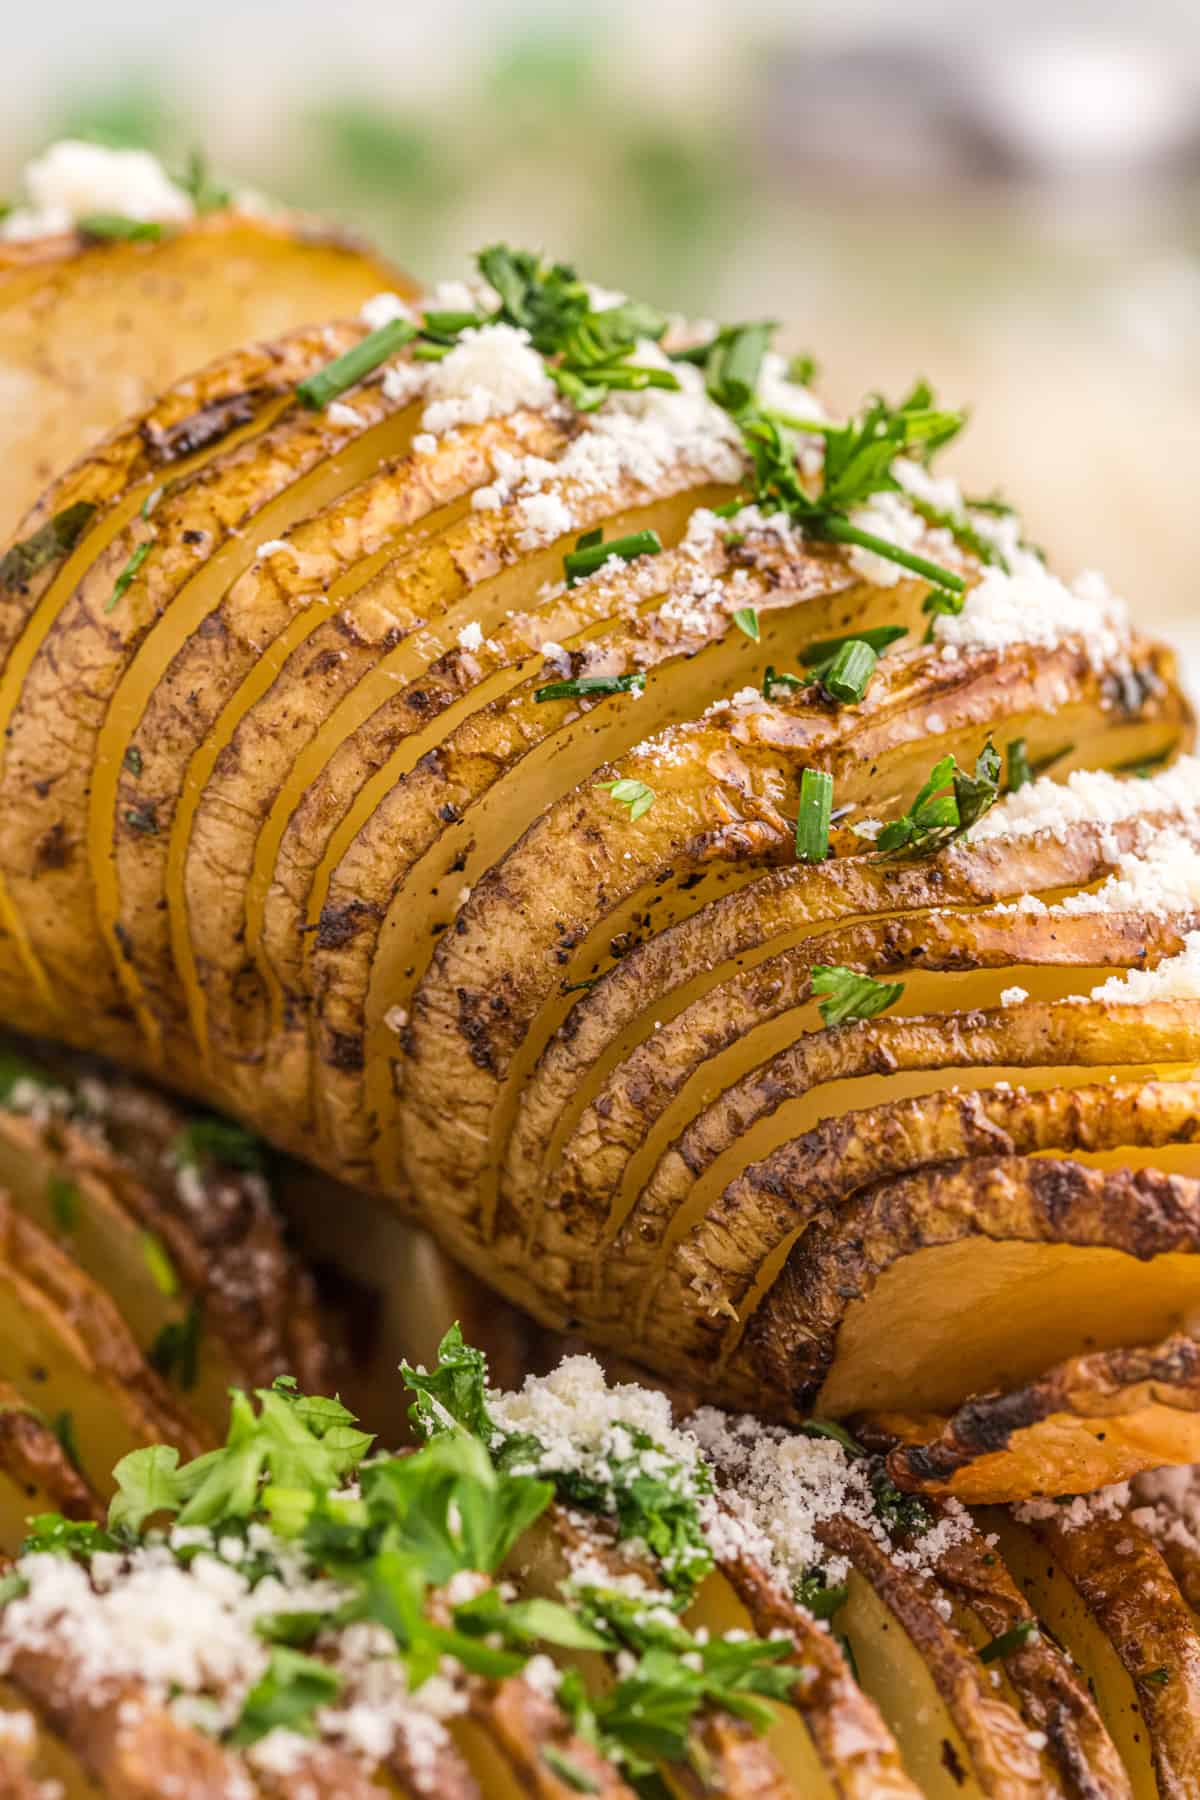 A garnished and baked Hasselback Potato is ready to eat.